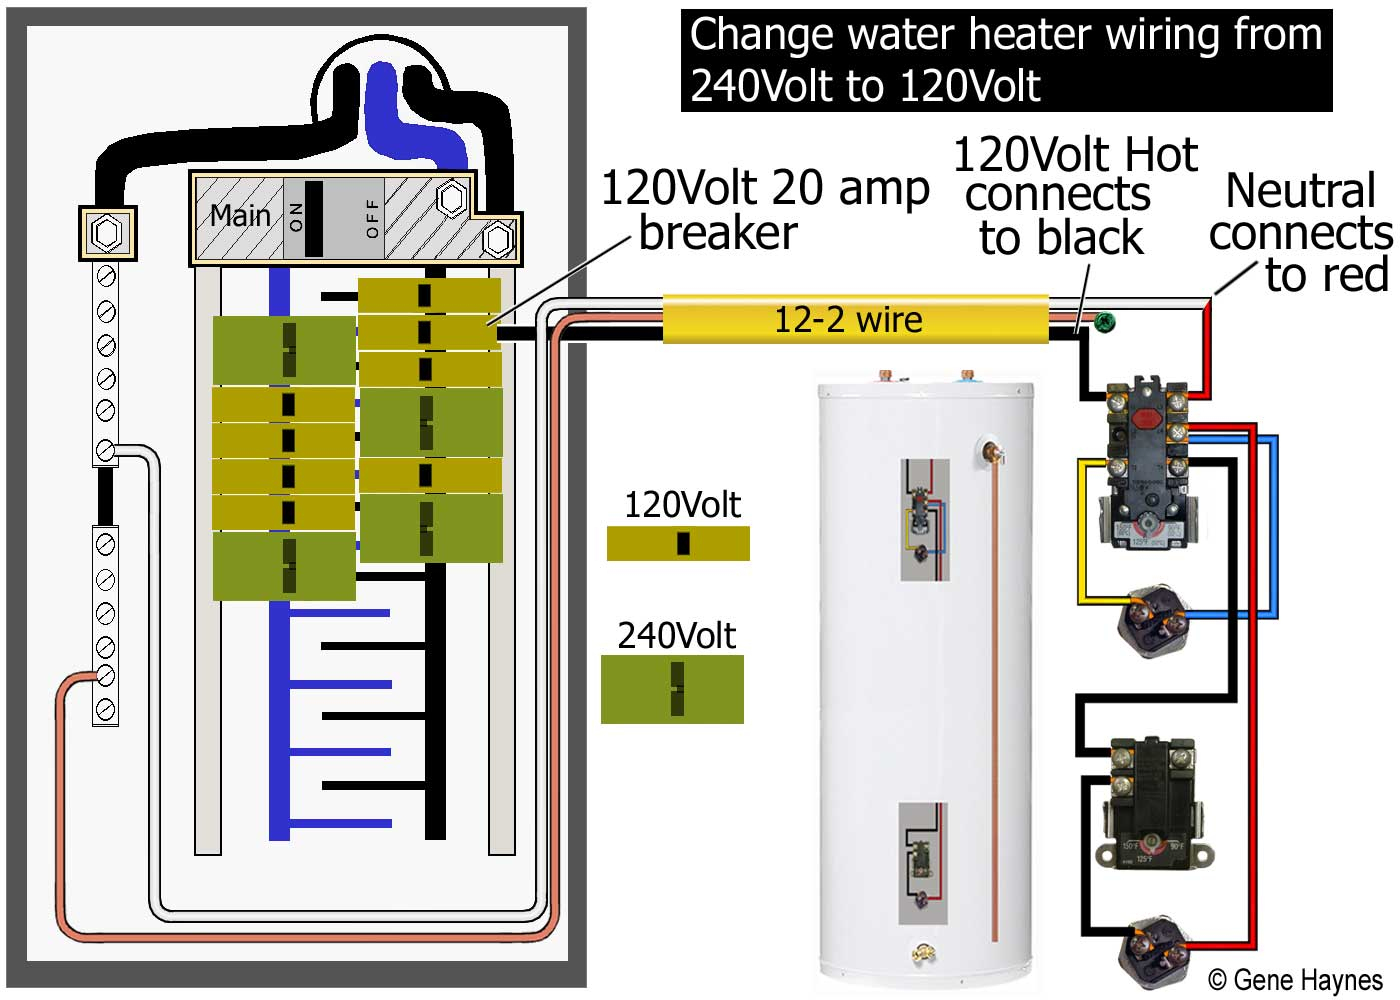 How To Wire Water Heater For 120 Volts - 240 Volt Heater Wiring Diagram